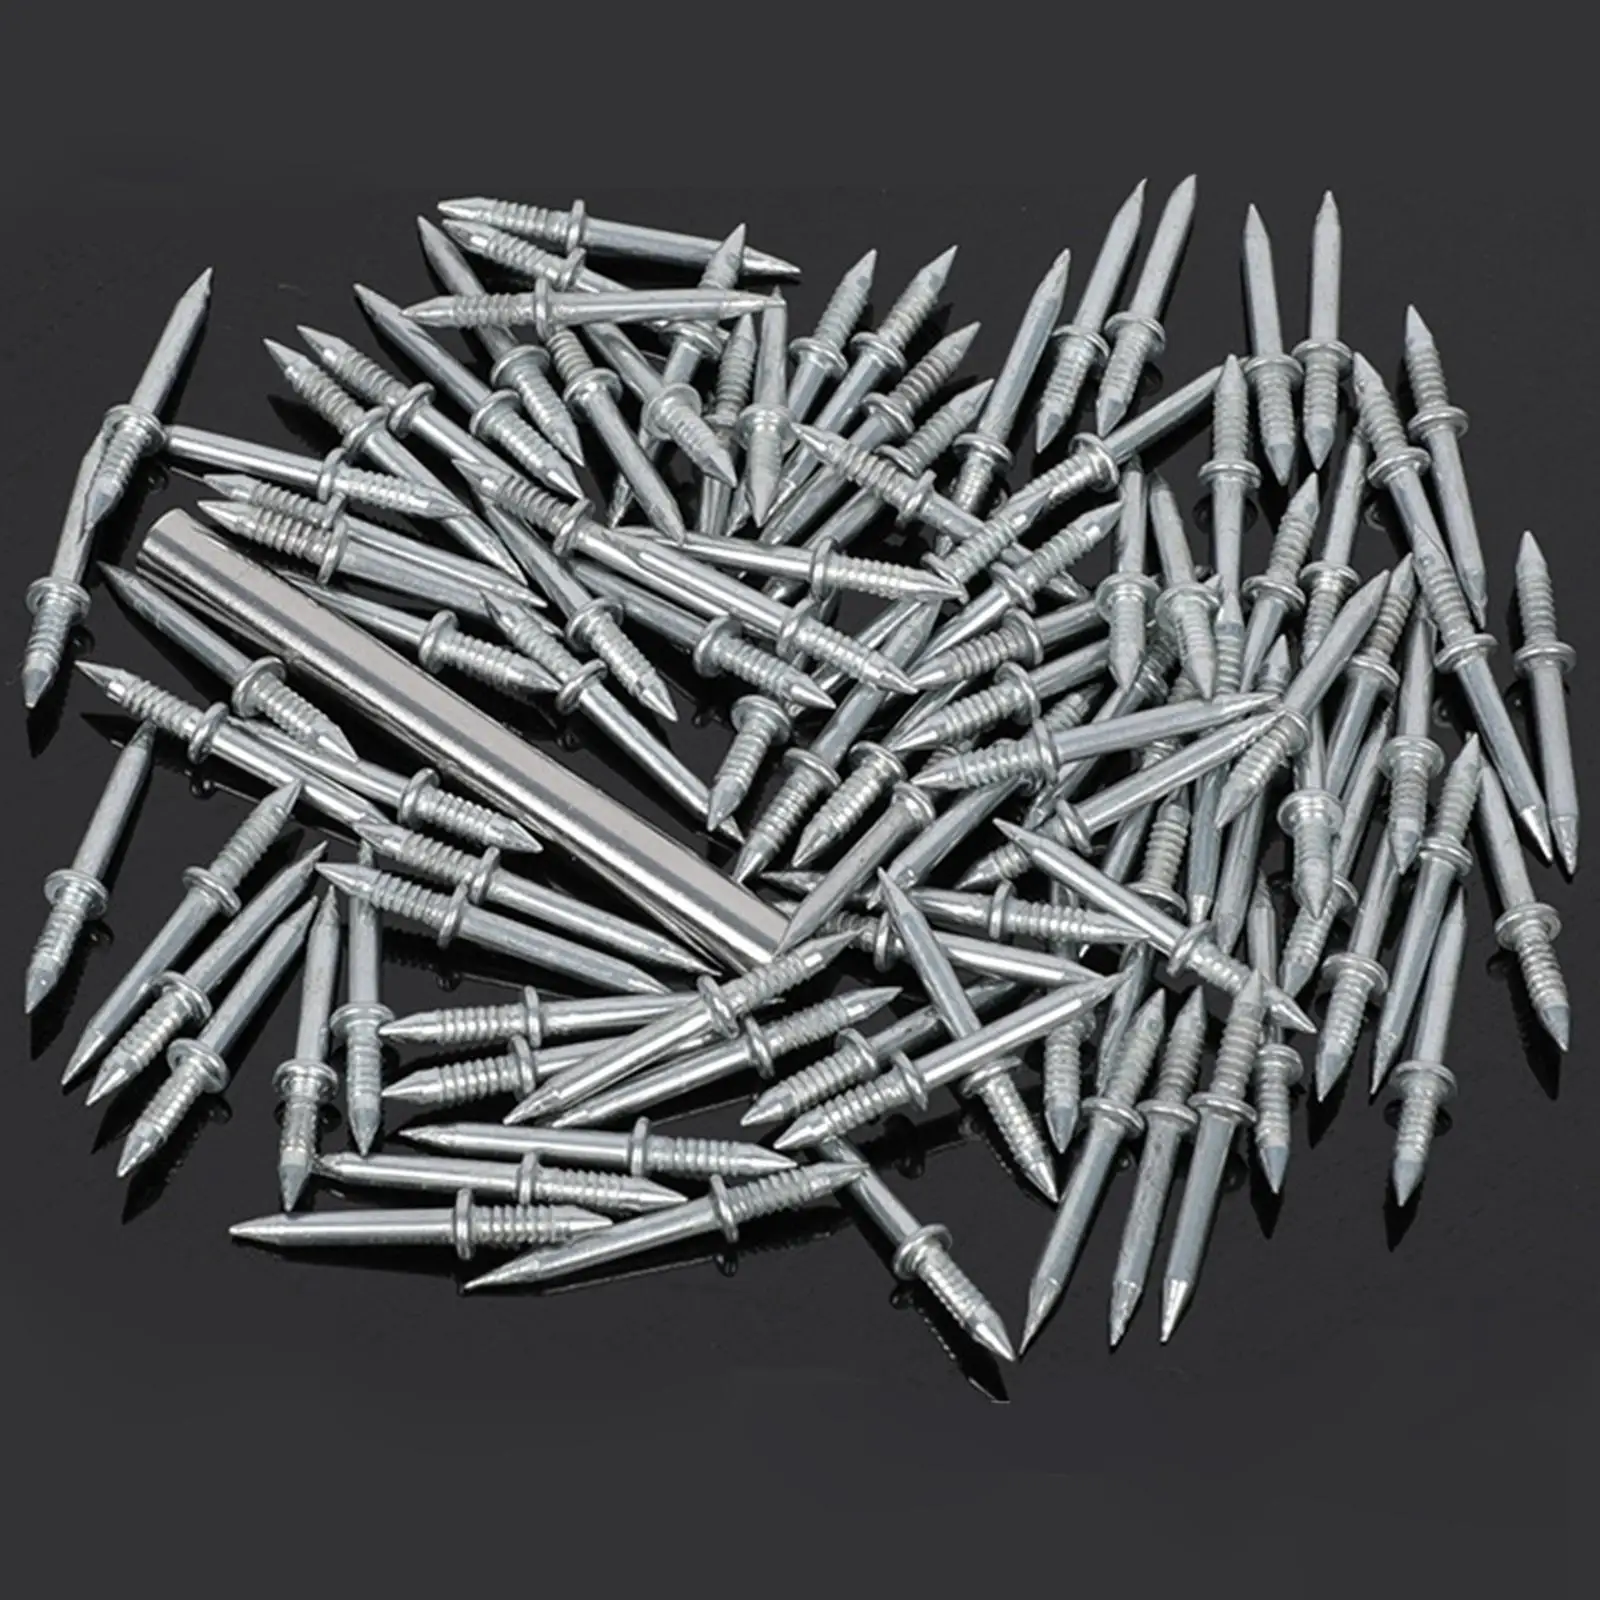 300x Double Head Skirting Thread Nail DIY Craft Baseboards Headboards No Trace Nails Joinery Nails Invisible Security Screws